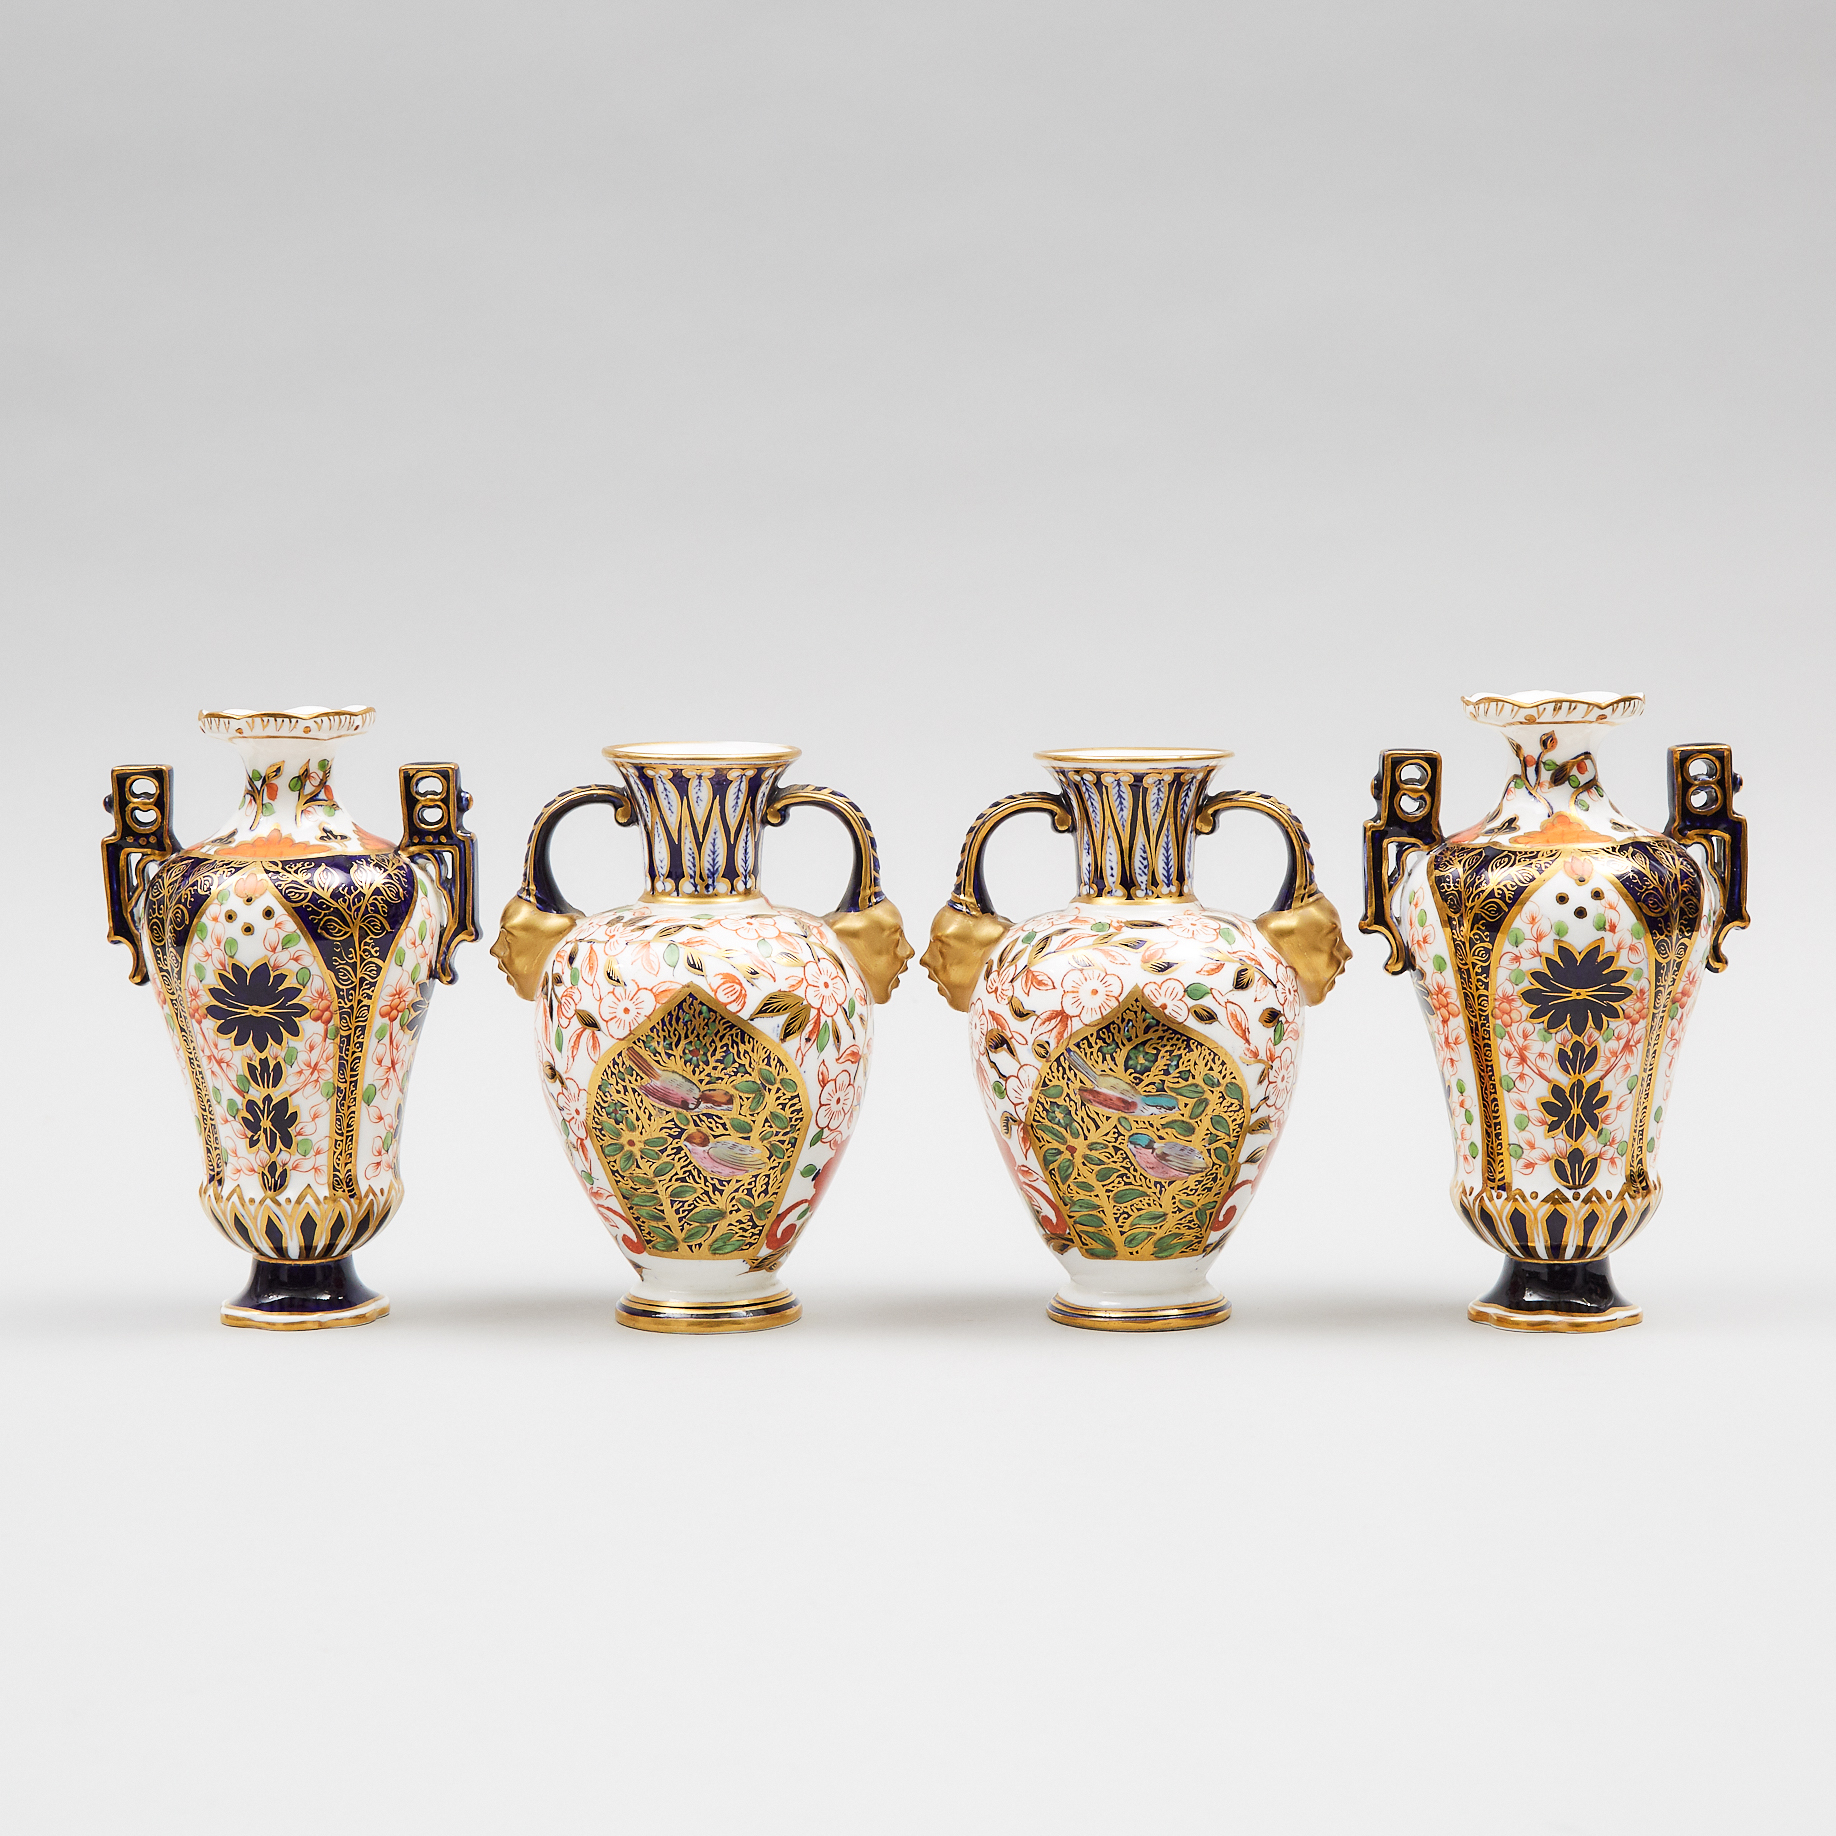 Two Pairs of Derby Crown Porcelain Co. Japan Pattern Two-Handled Vases, c.1885